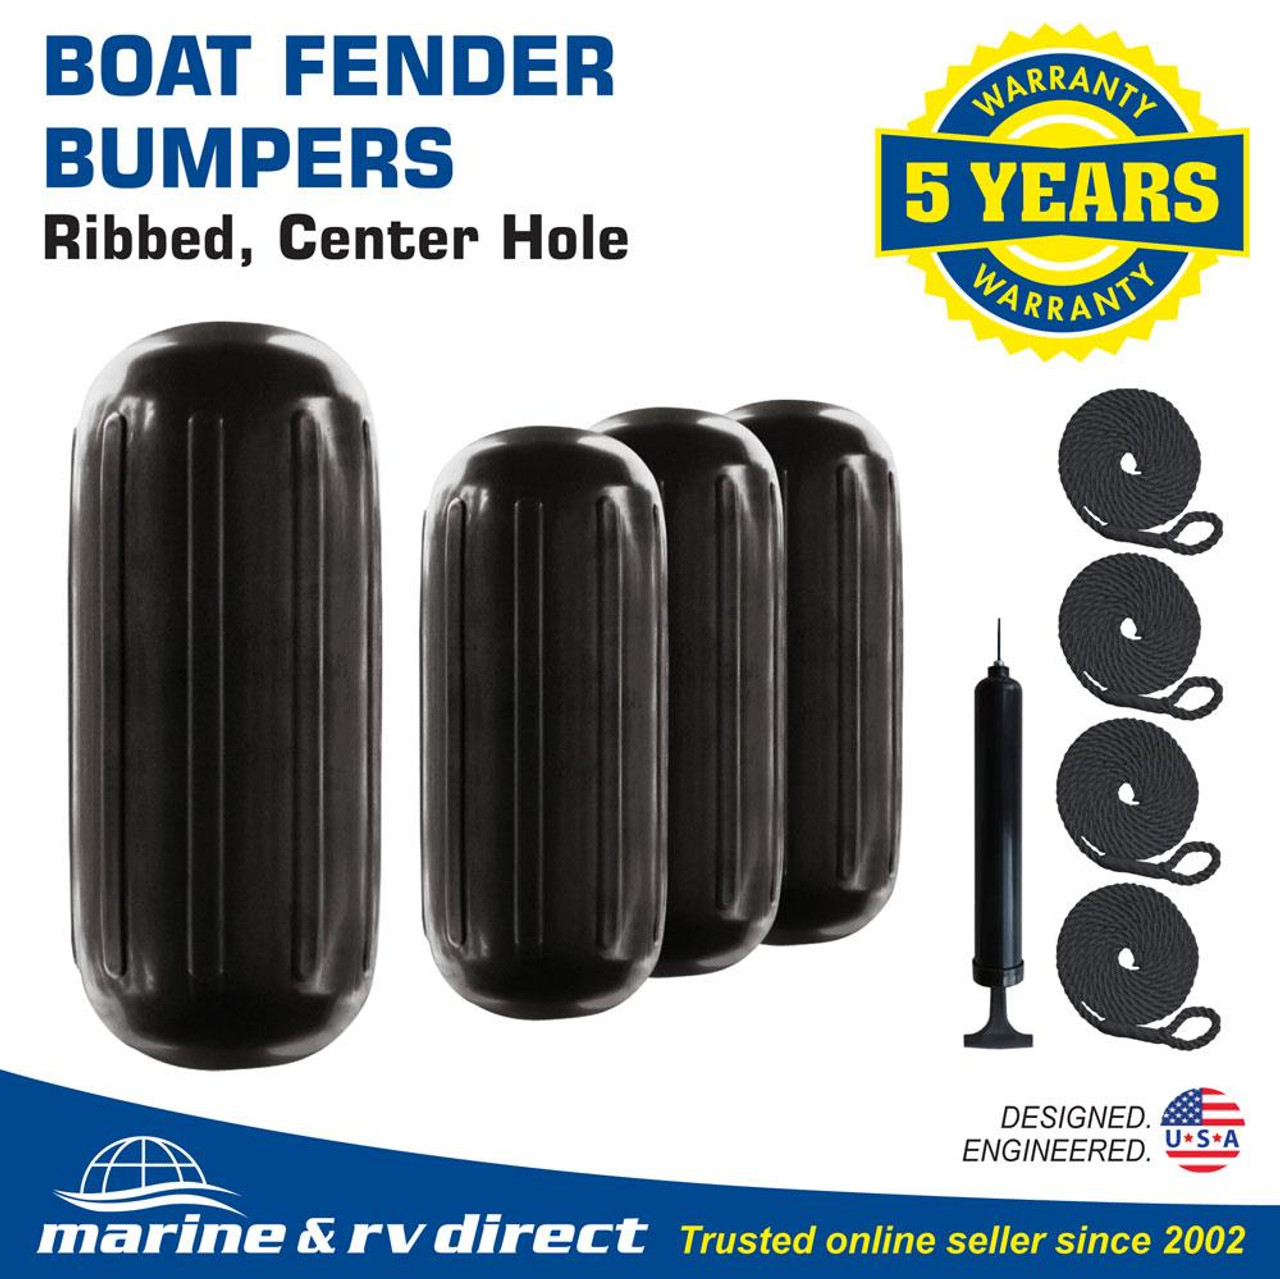 4 NEW RIBBED BOAT FENDERS 10 x 28 BLACK CENTER HOLE BUMPERS MOORING  PROTECTION - Marine and RV Direct